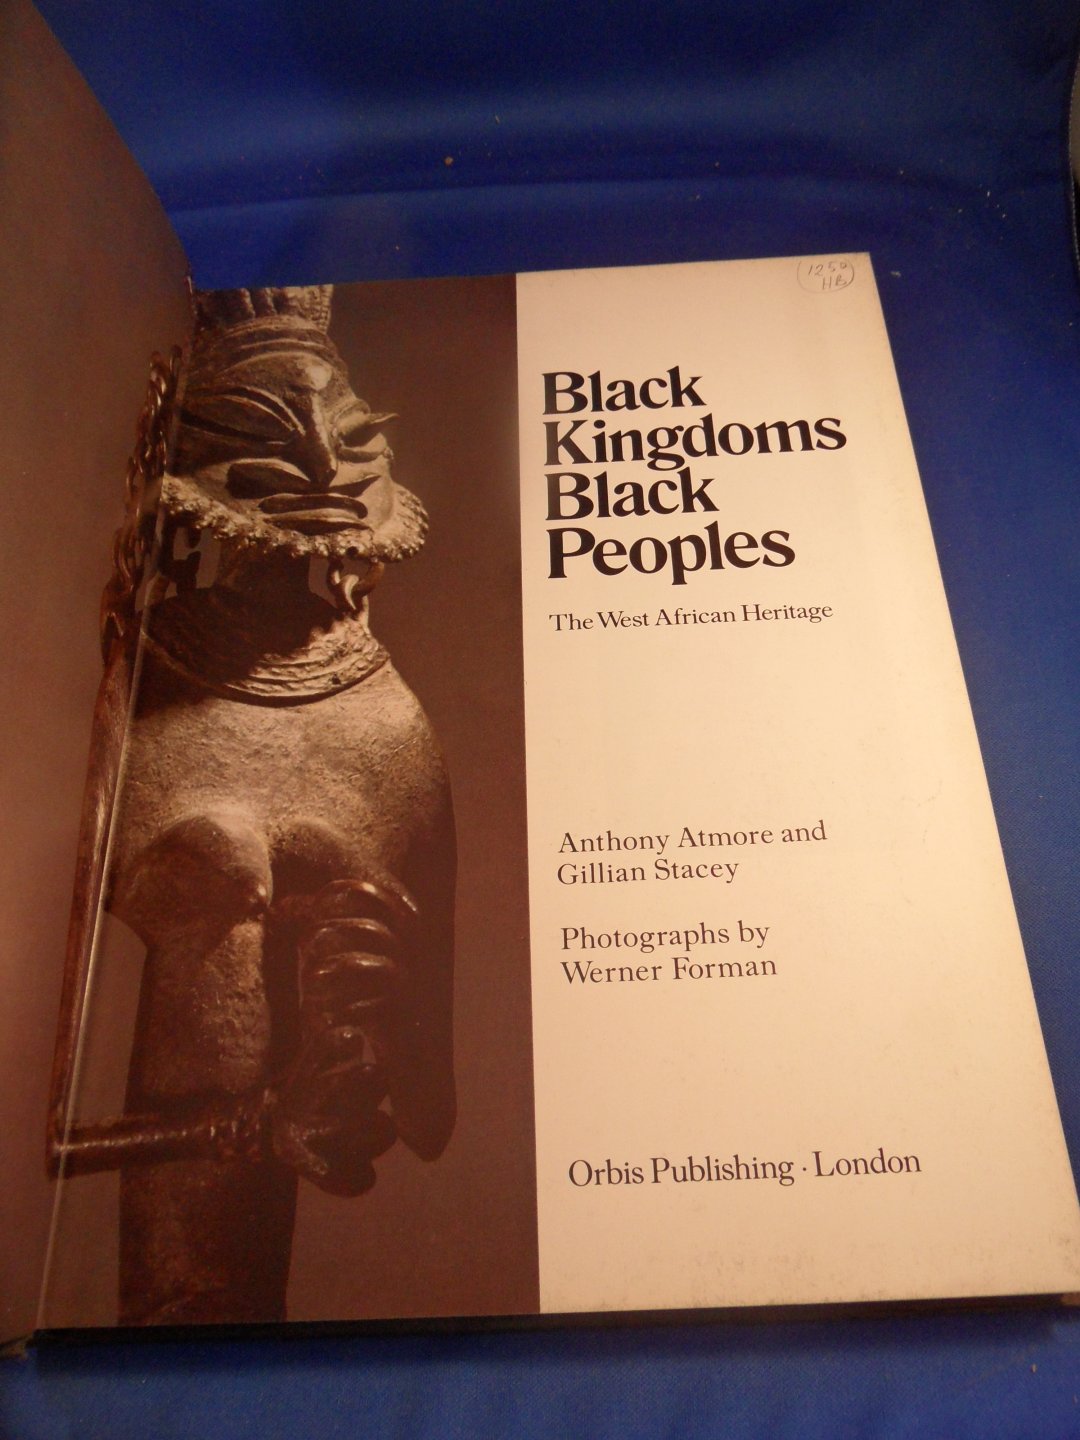 Atmore, Anthony & Stacey, Gillian - Black kingdoms black peoples. The West African Heritage